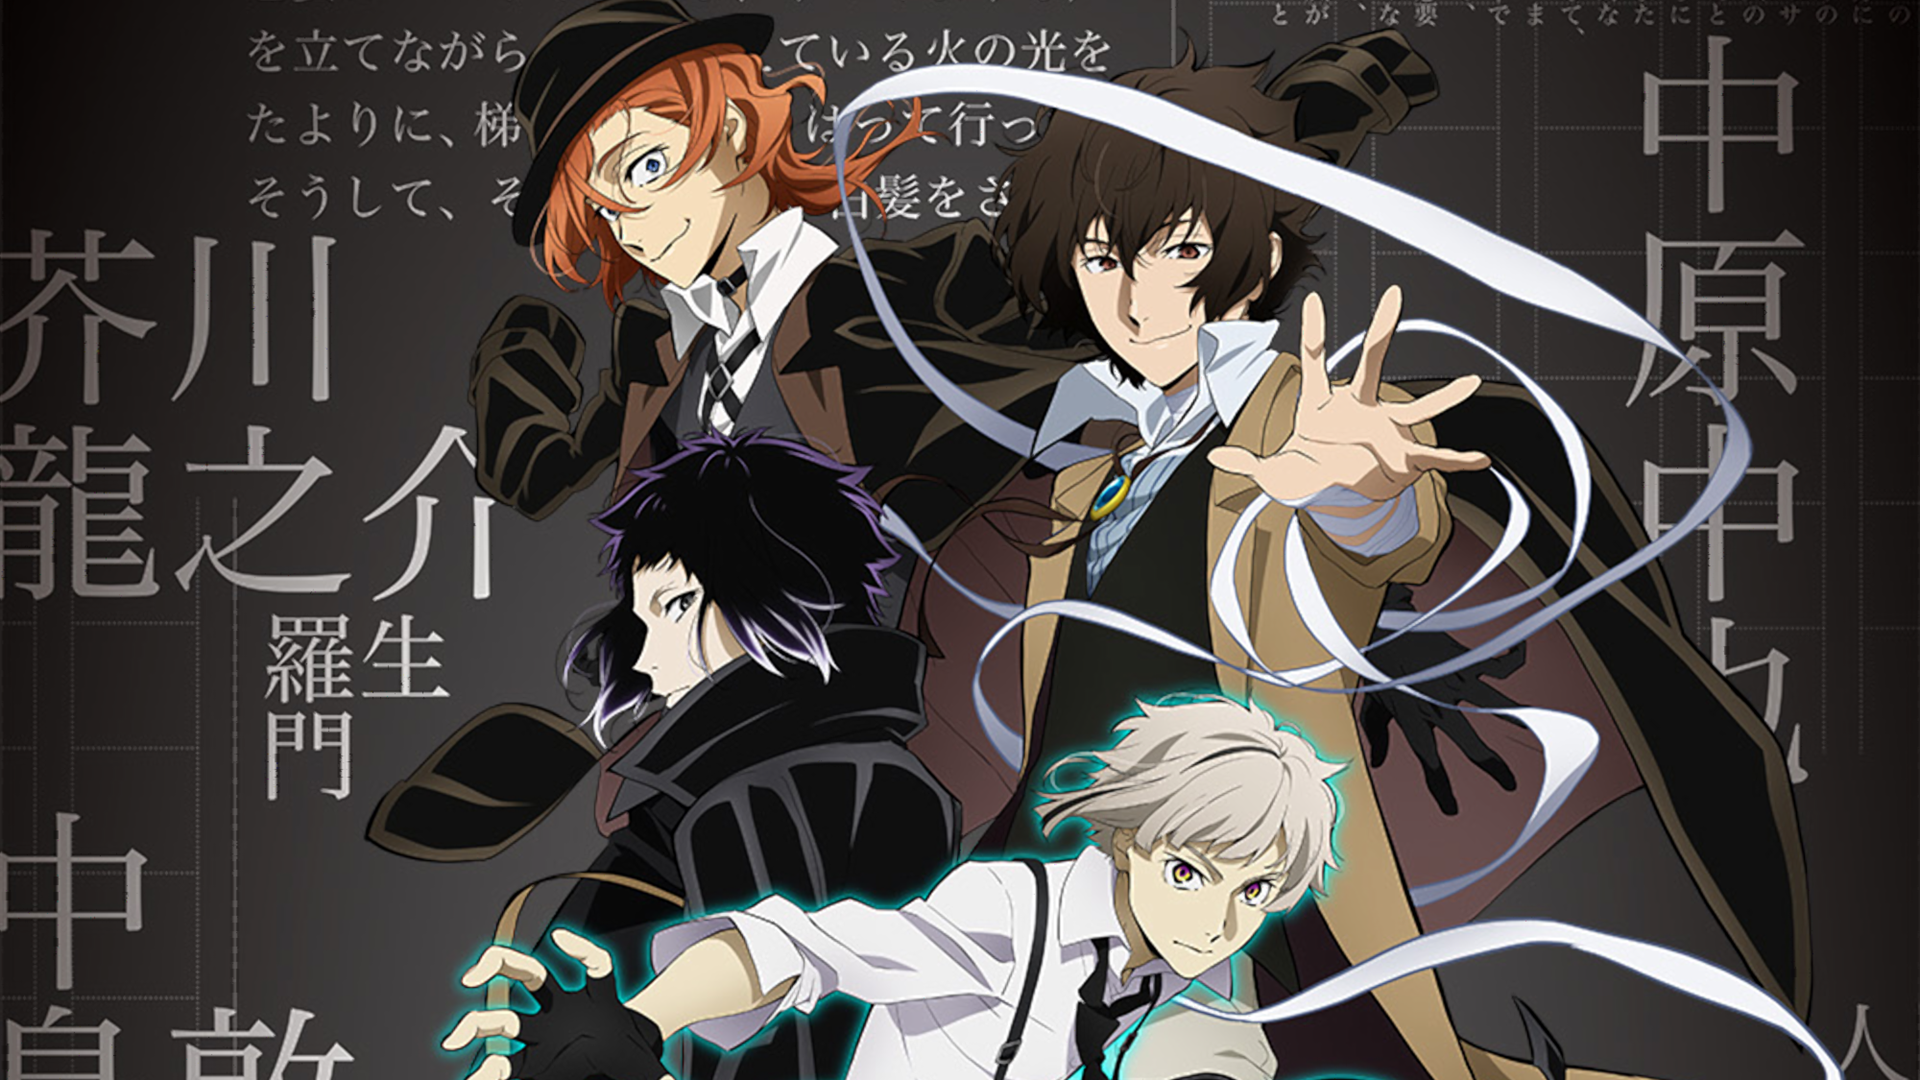 Bungo Stray Dogs Season 5 Episode 3 Release Date & Time